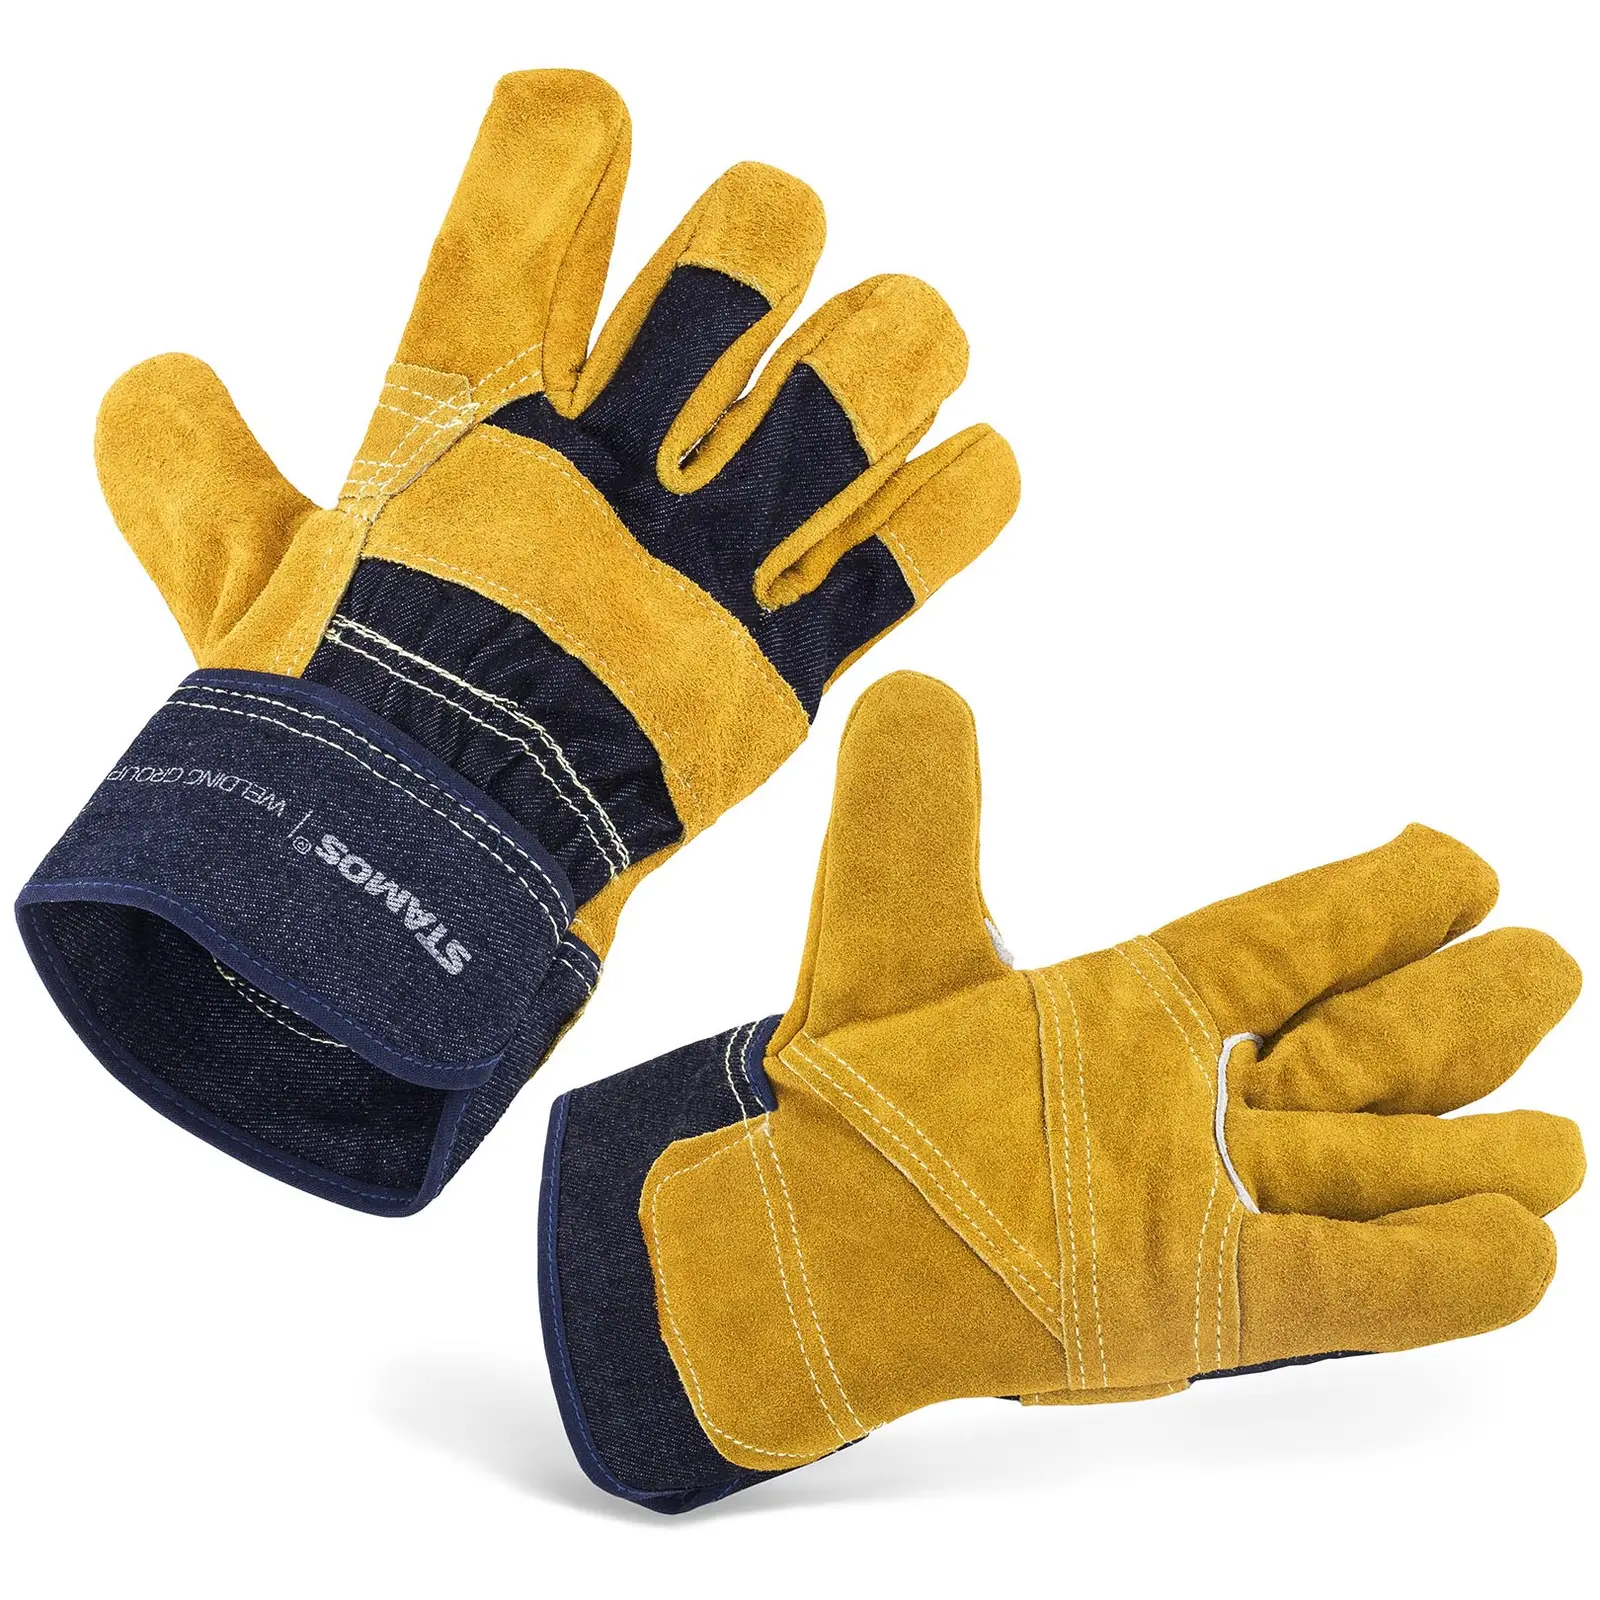 Welding gloves - size. M - lined